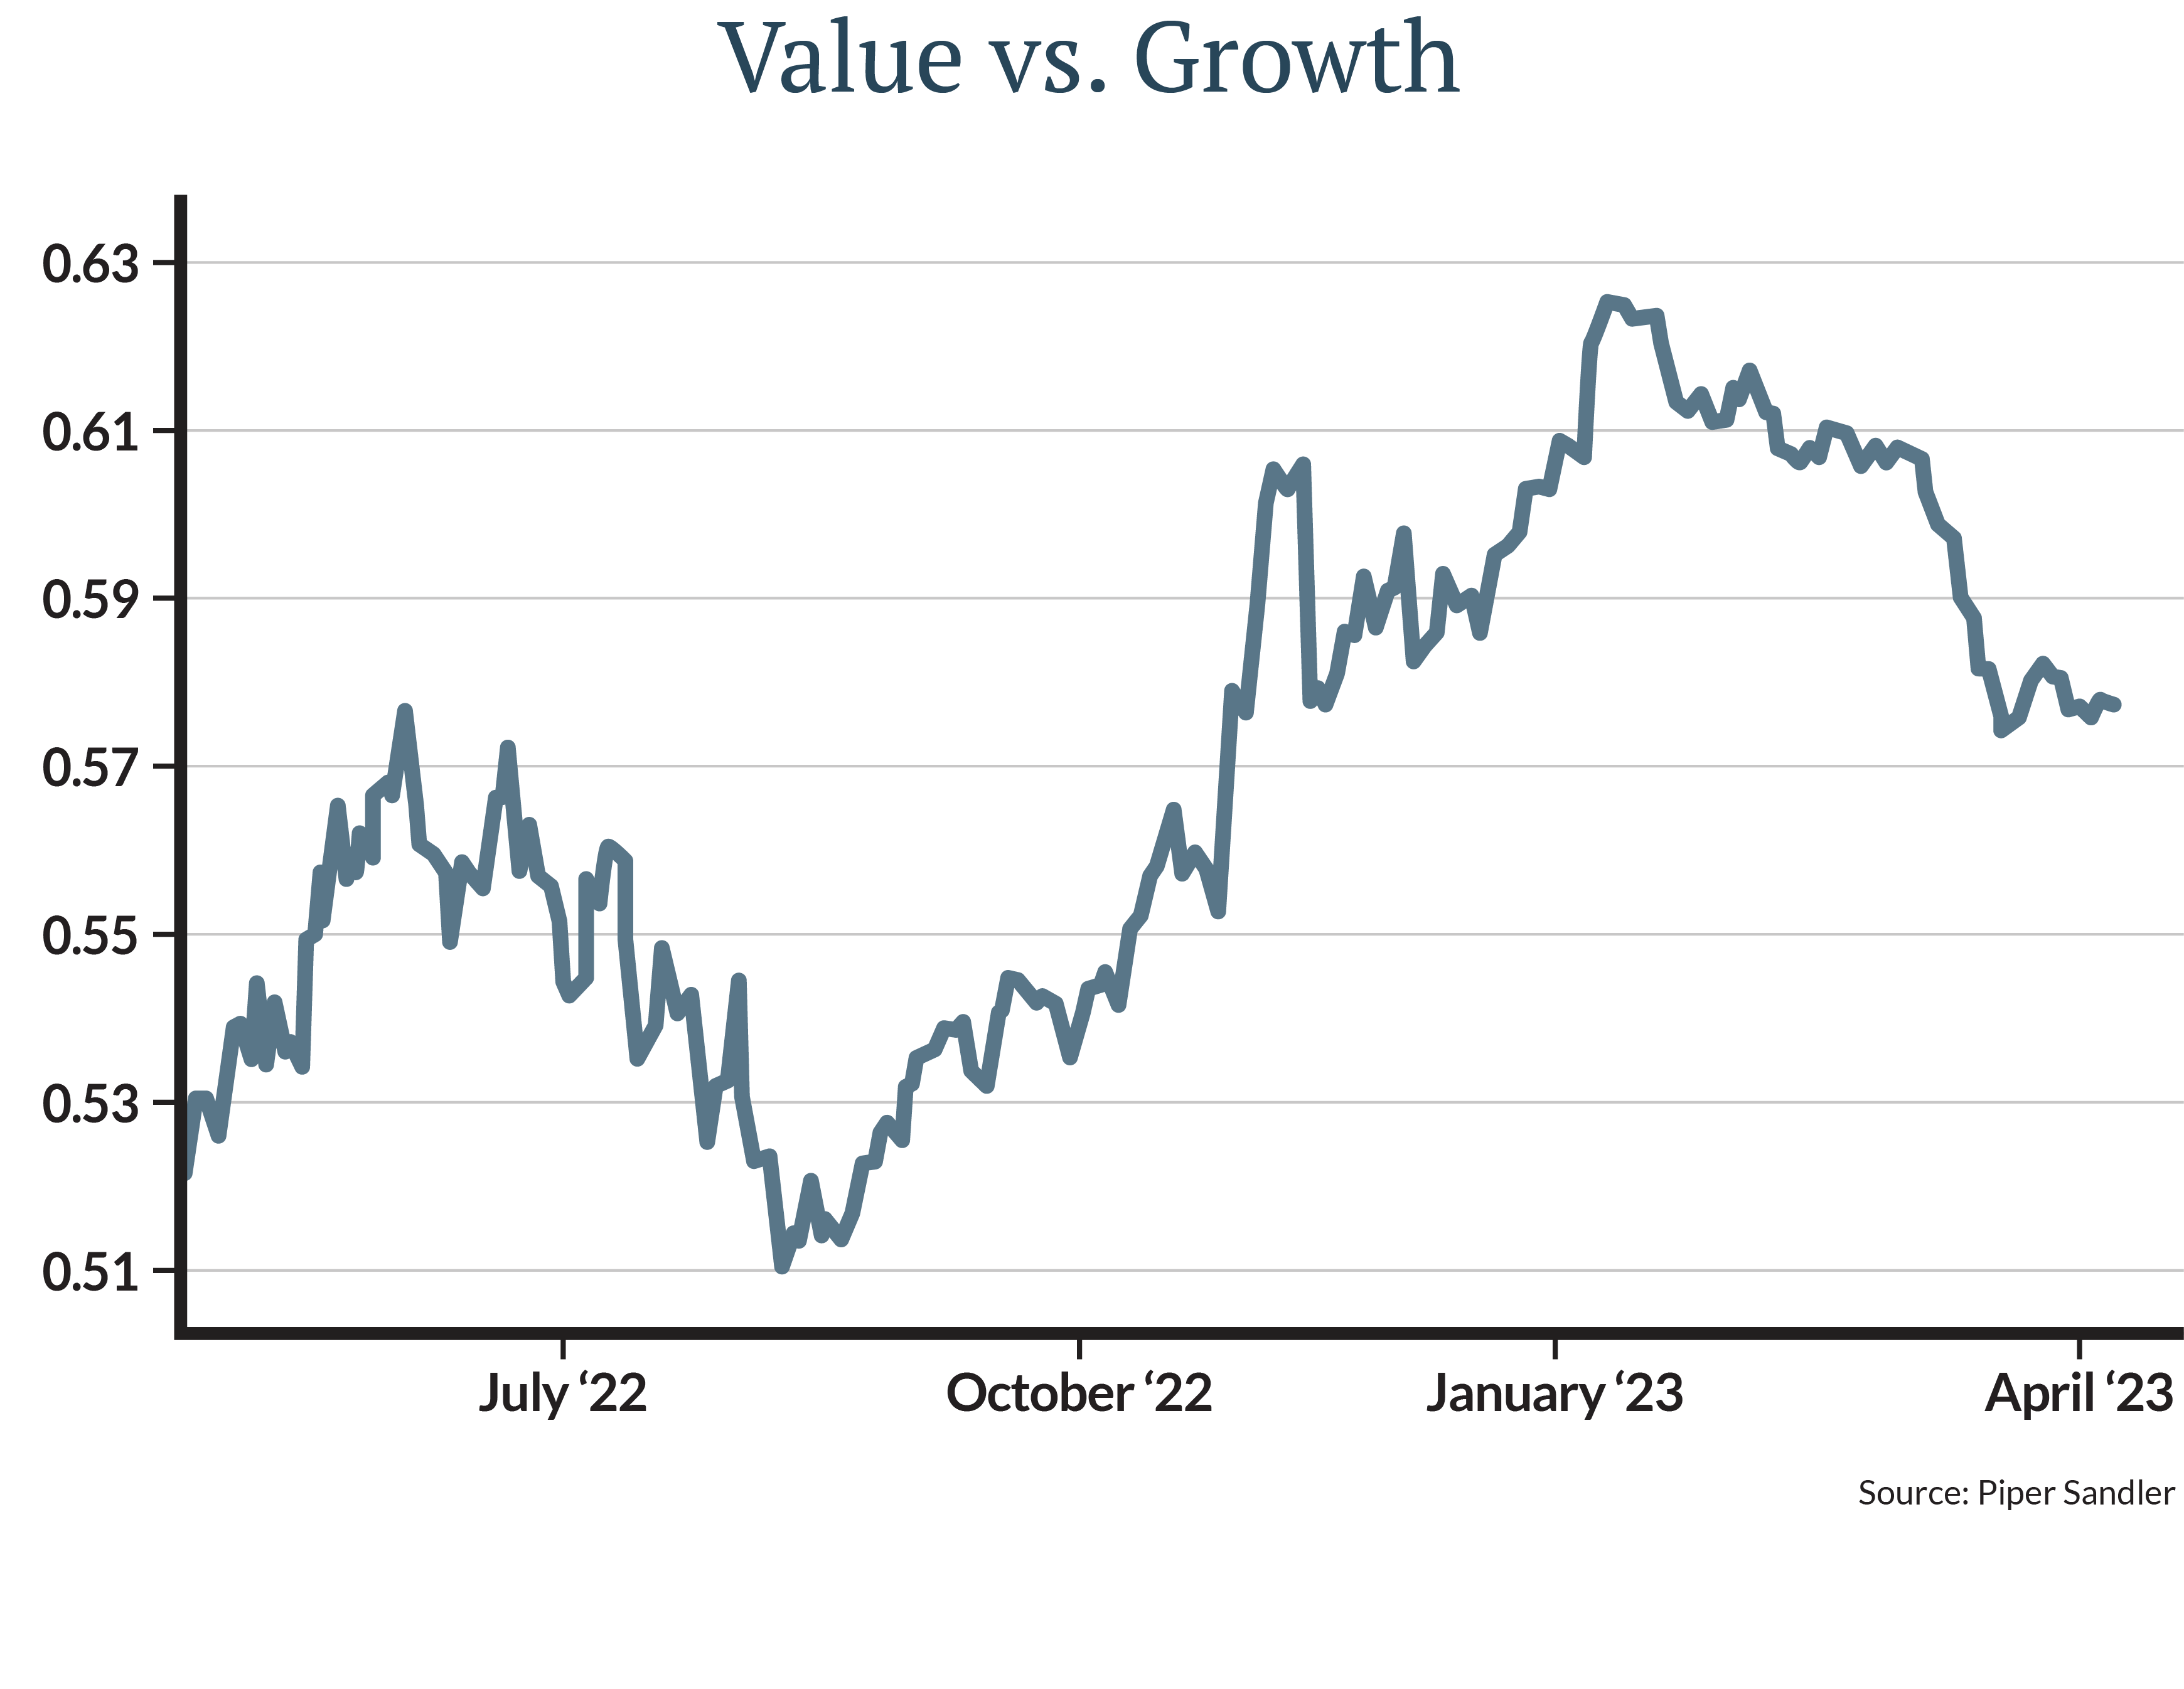 When the line is rising, Value is outperforming Growth, and when the line is falling, Growth is outperforming Value.